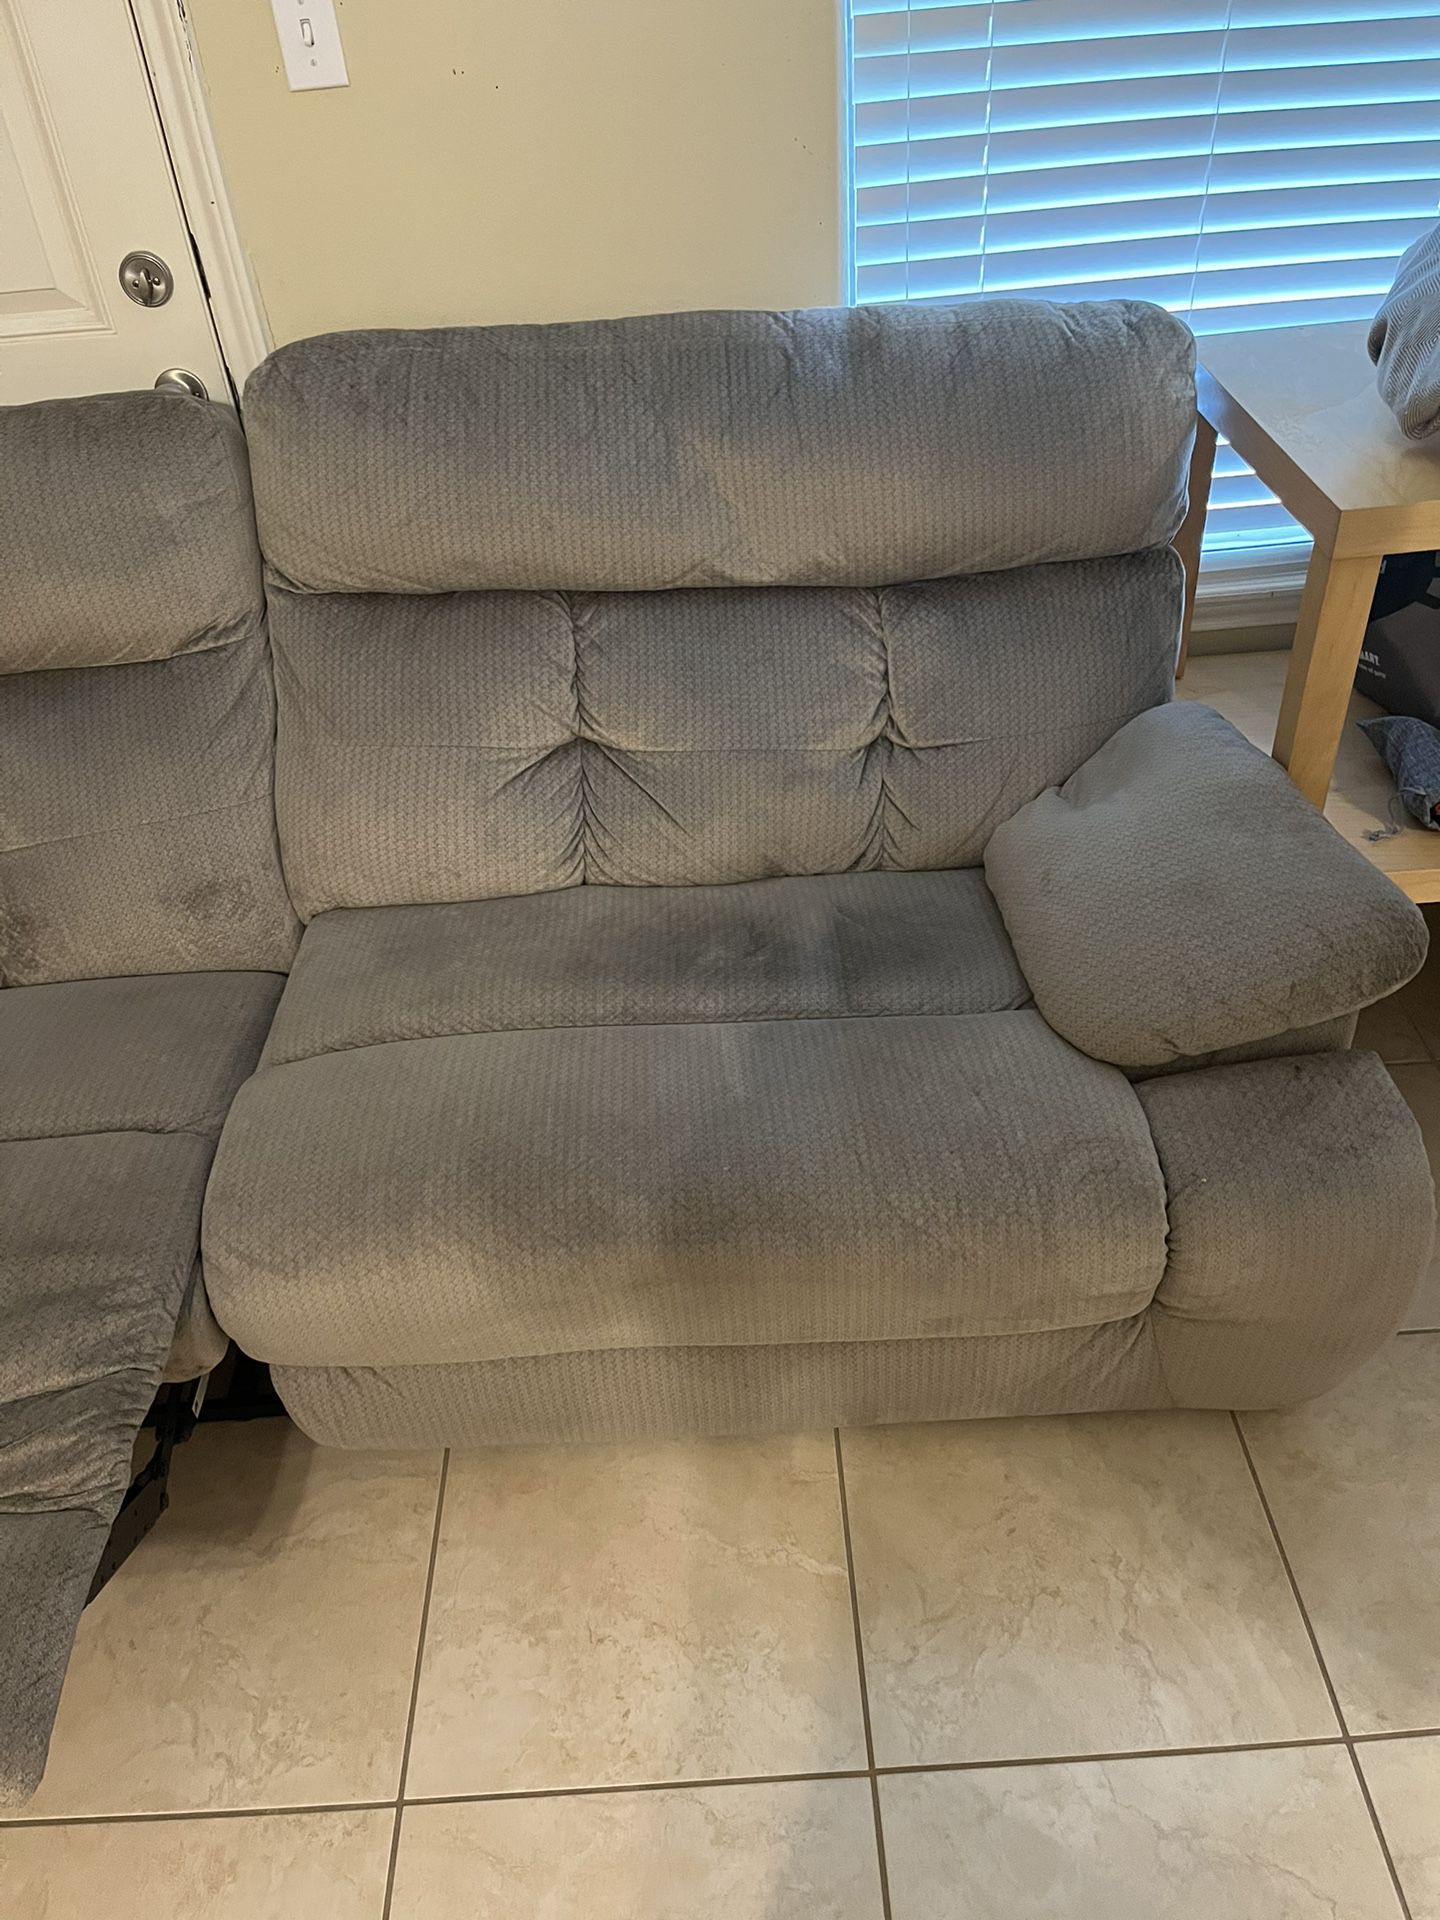 Sofa/couch Recliner